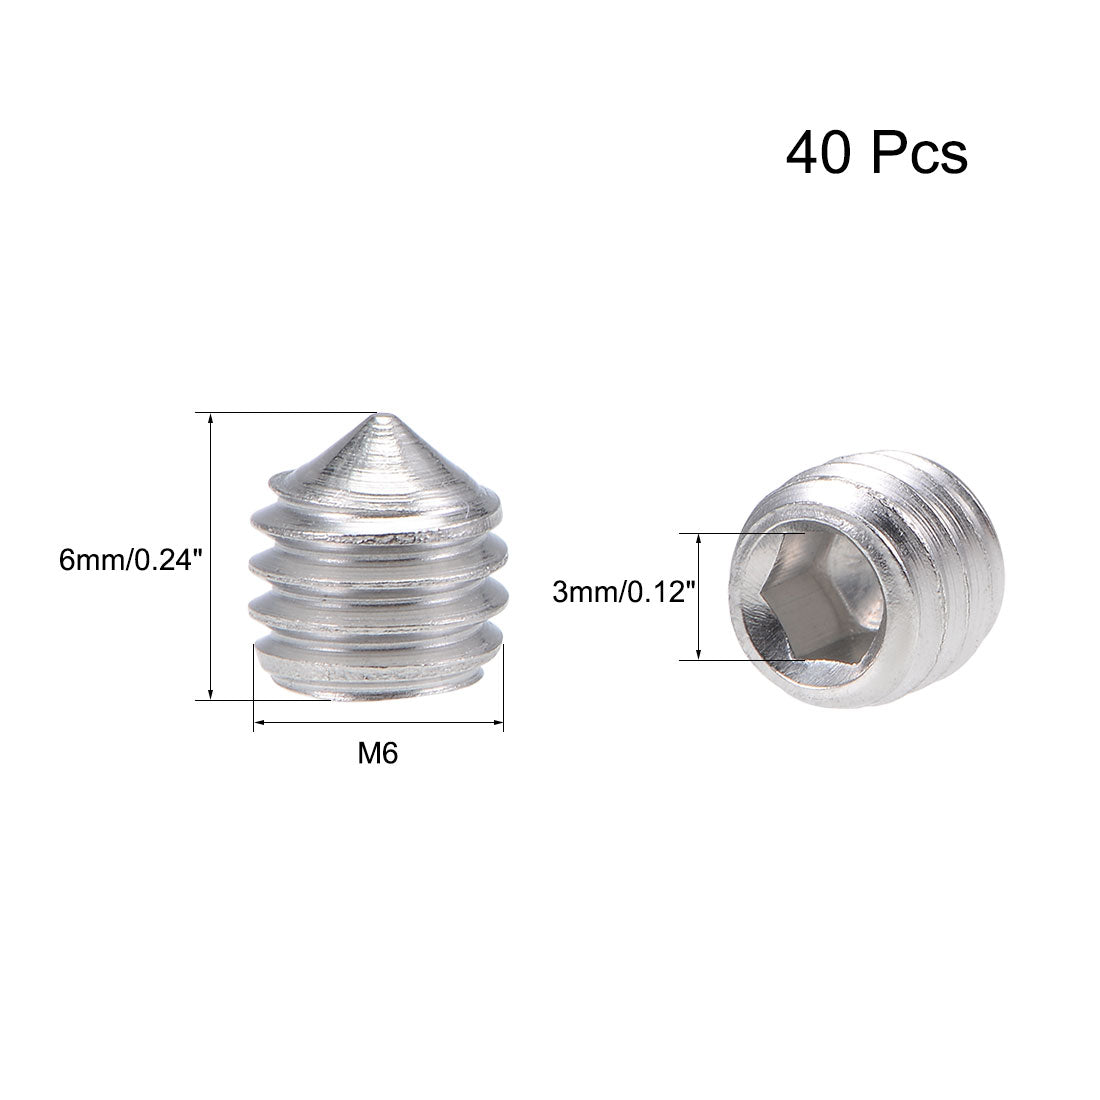 uxcell Uxcell 40Pcs M6x6mm Internal Hex Socket Set Grub Screws Cone Point 304 Stainless Steel Screw